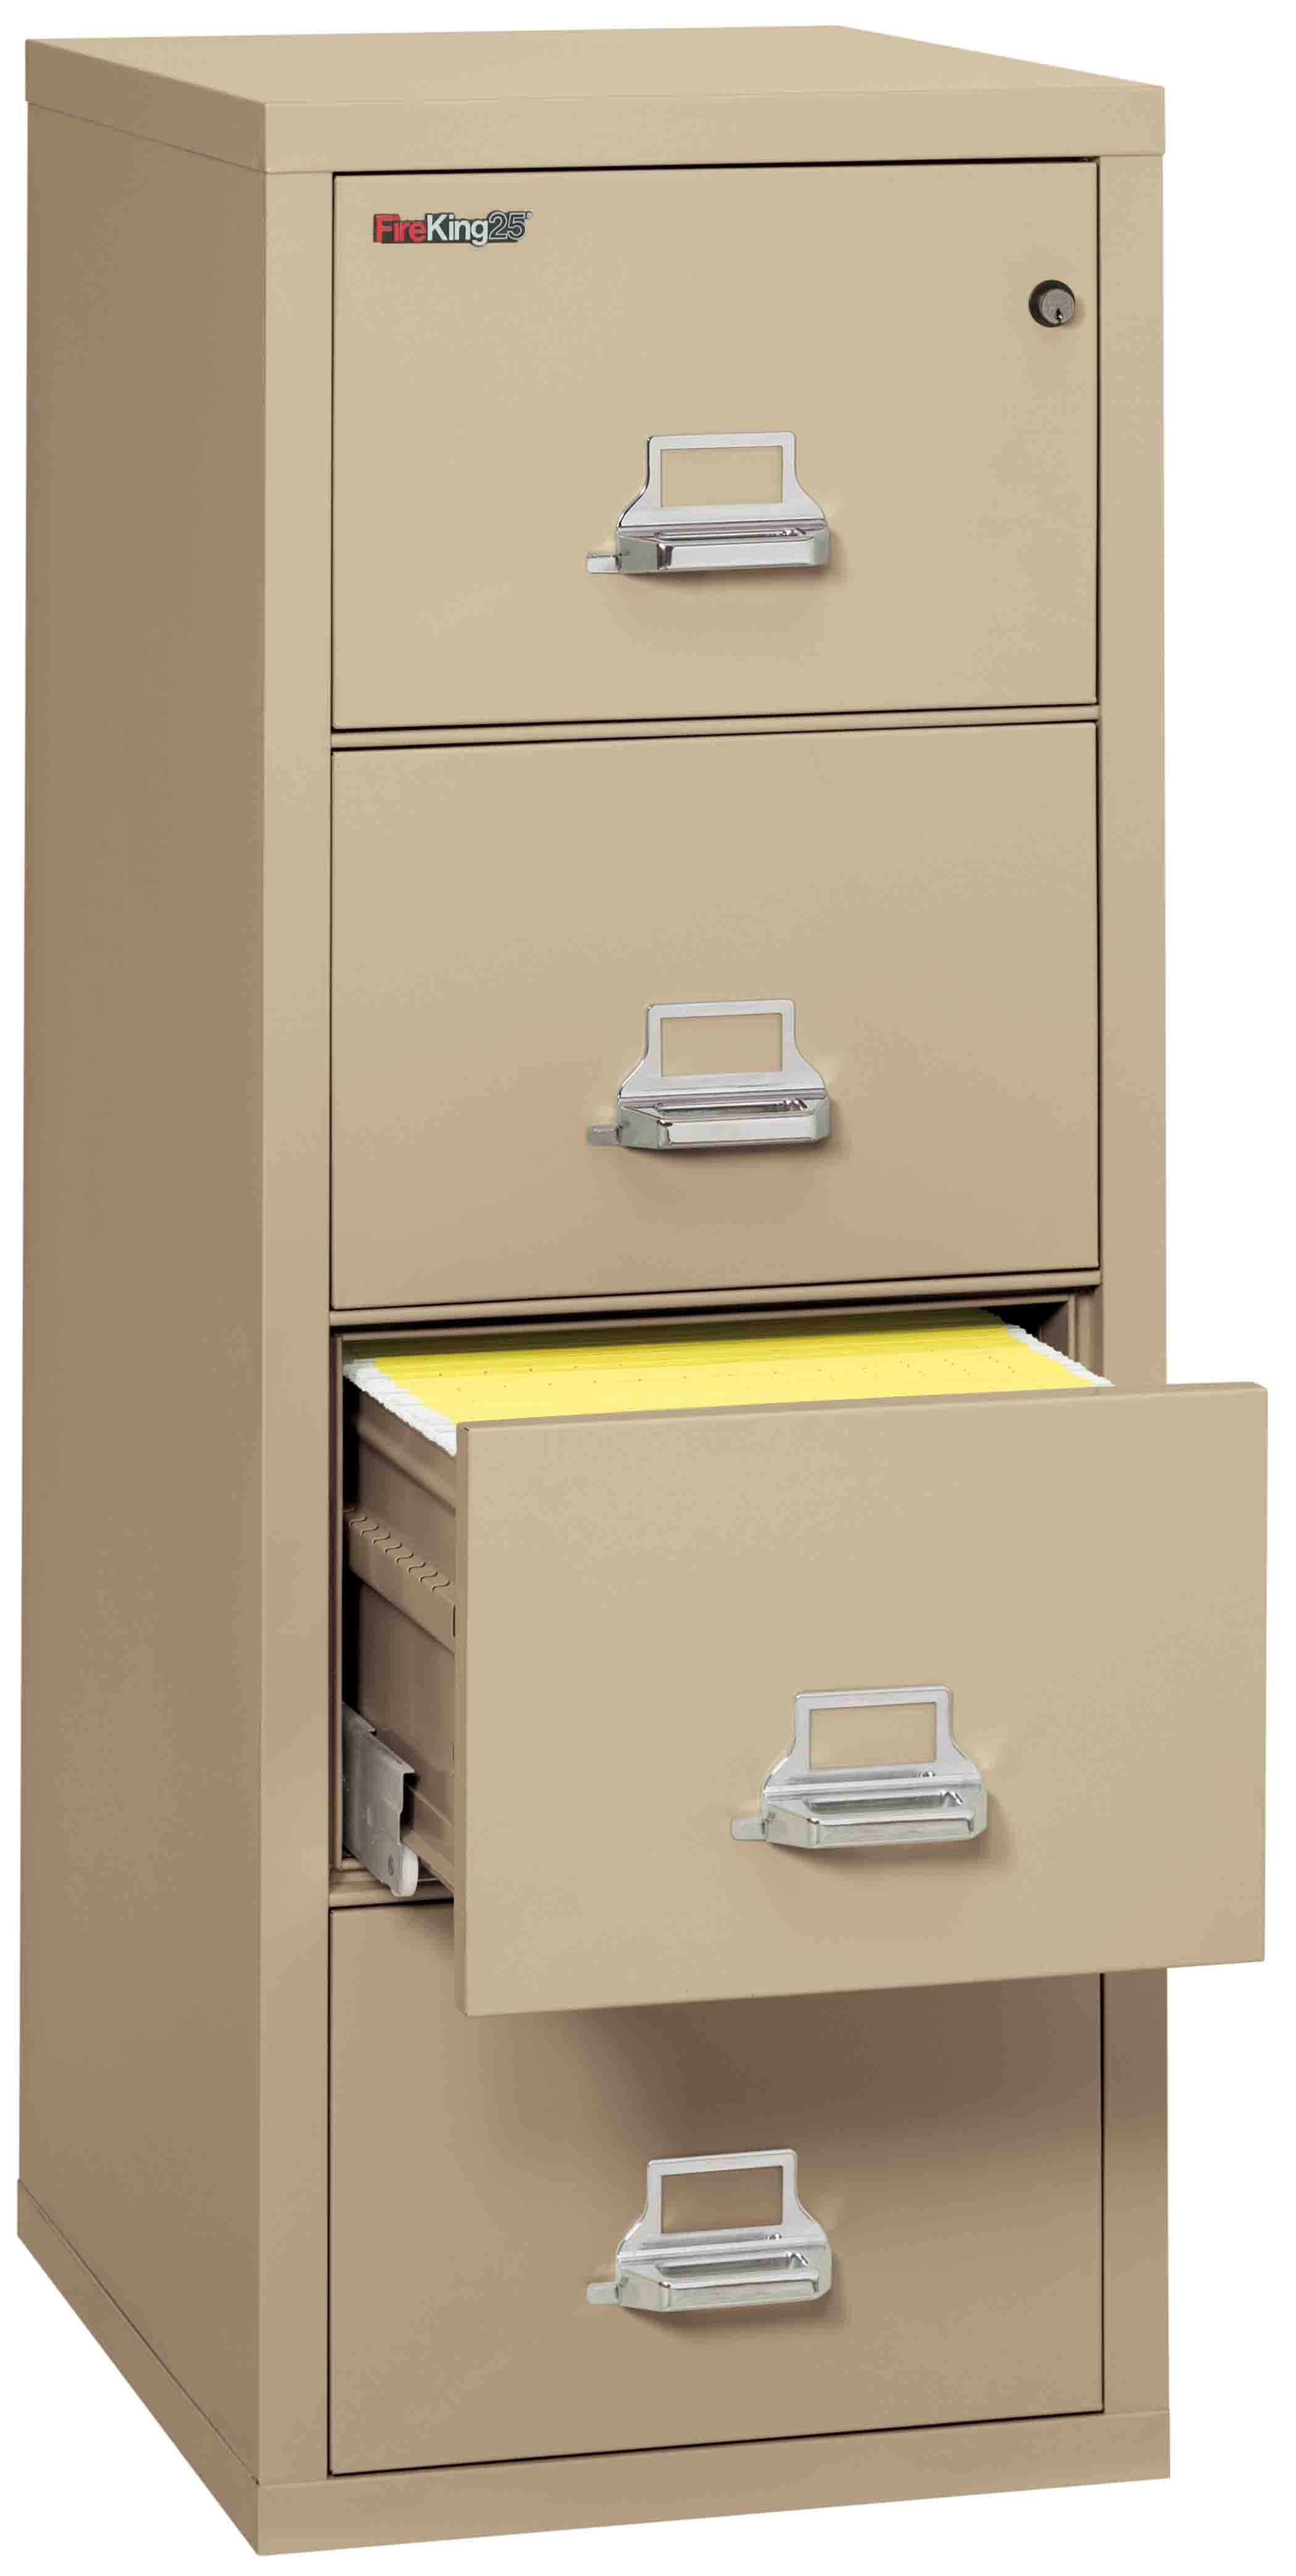 Fire King 4 1825 C Fireking 25 File Cabinets 4 Drawer 1 Hour Fire with sizing 2100 X 4174